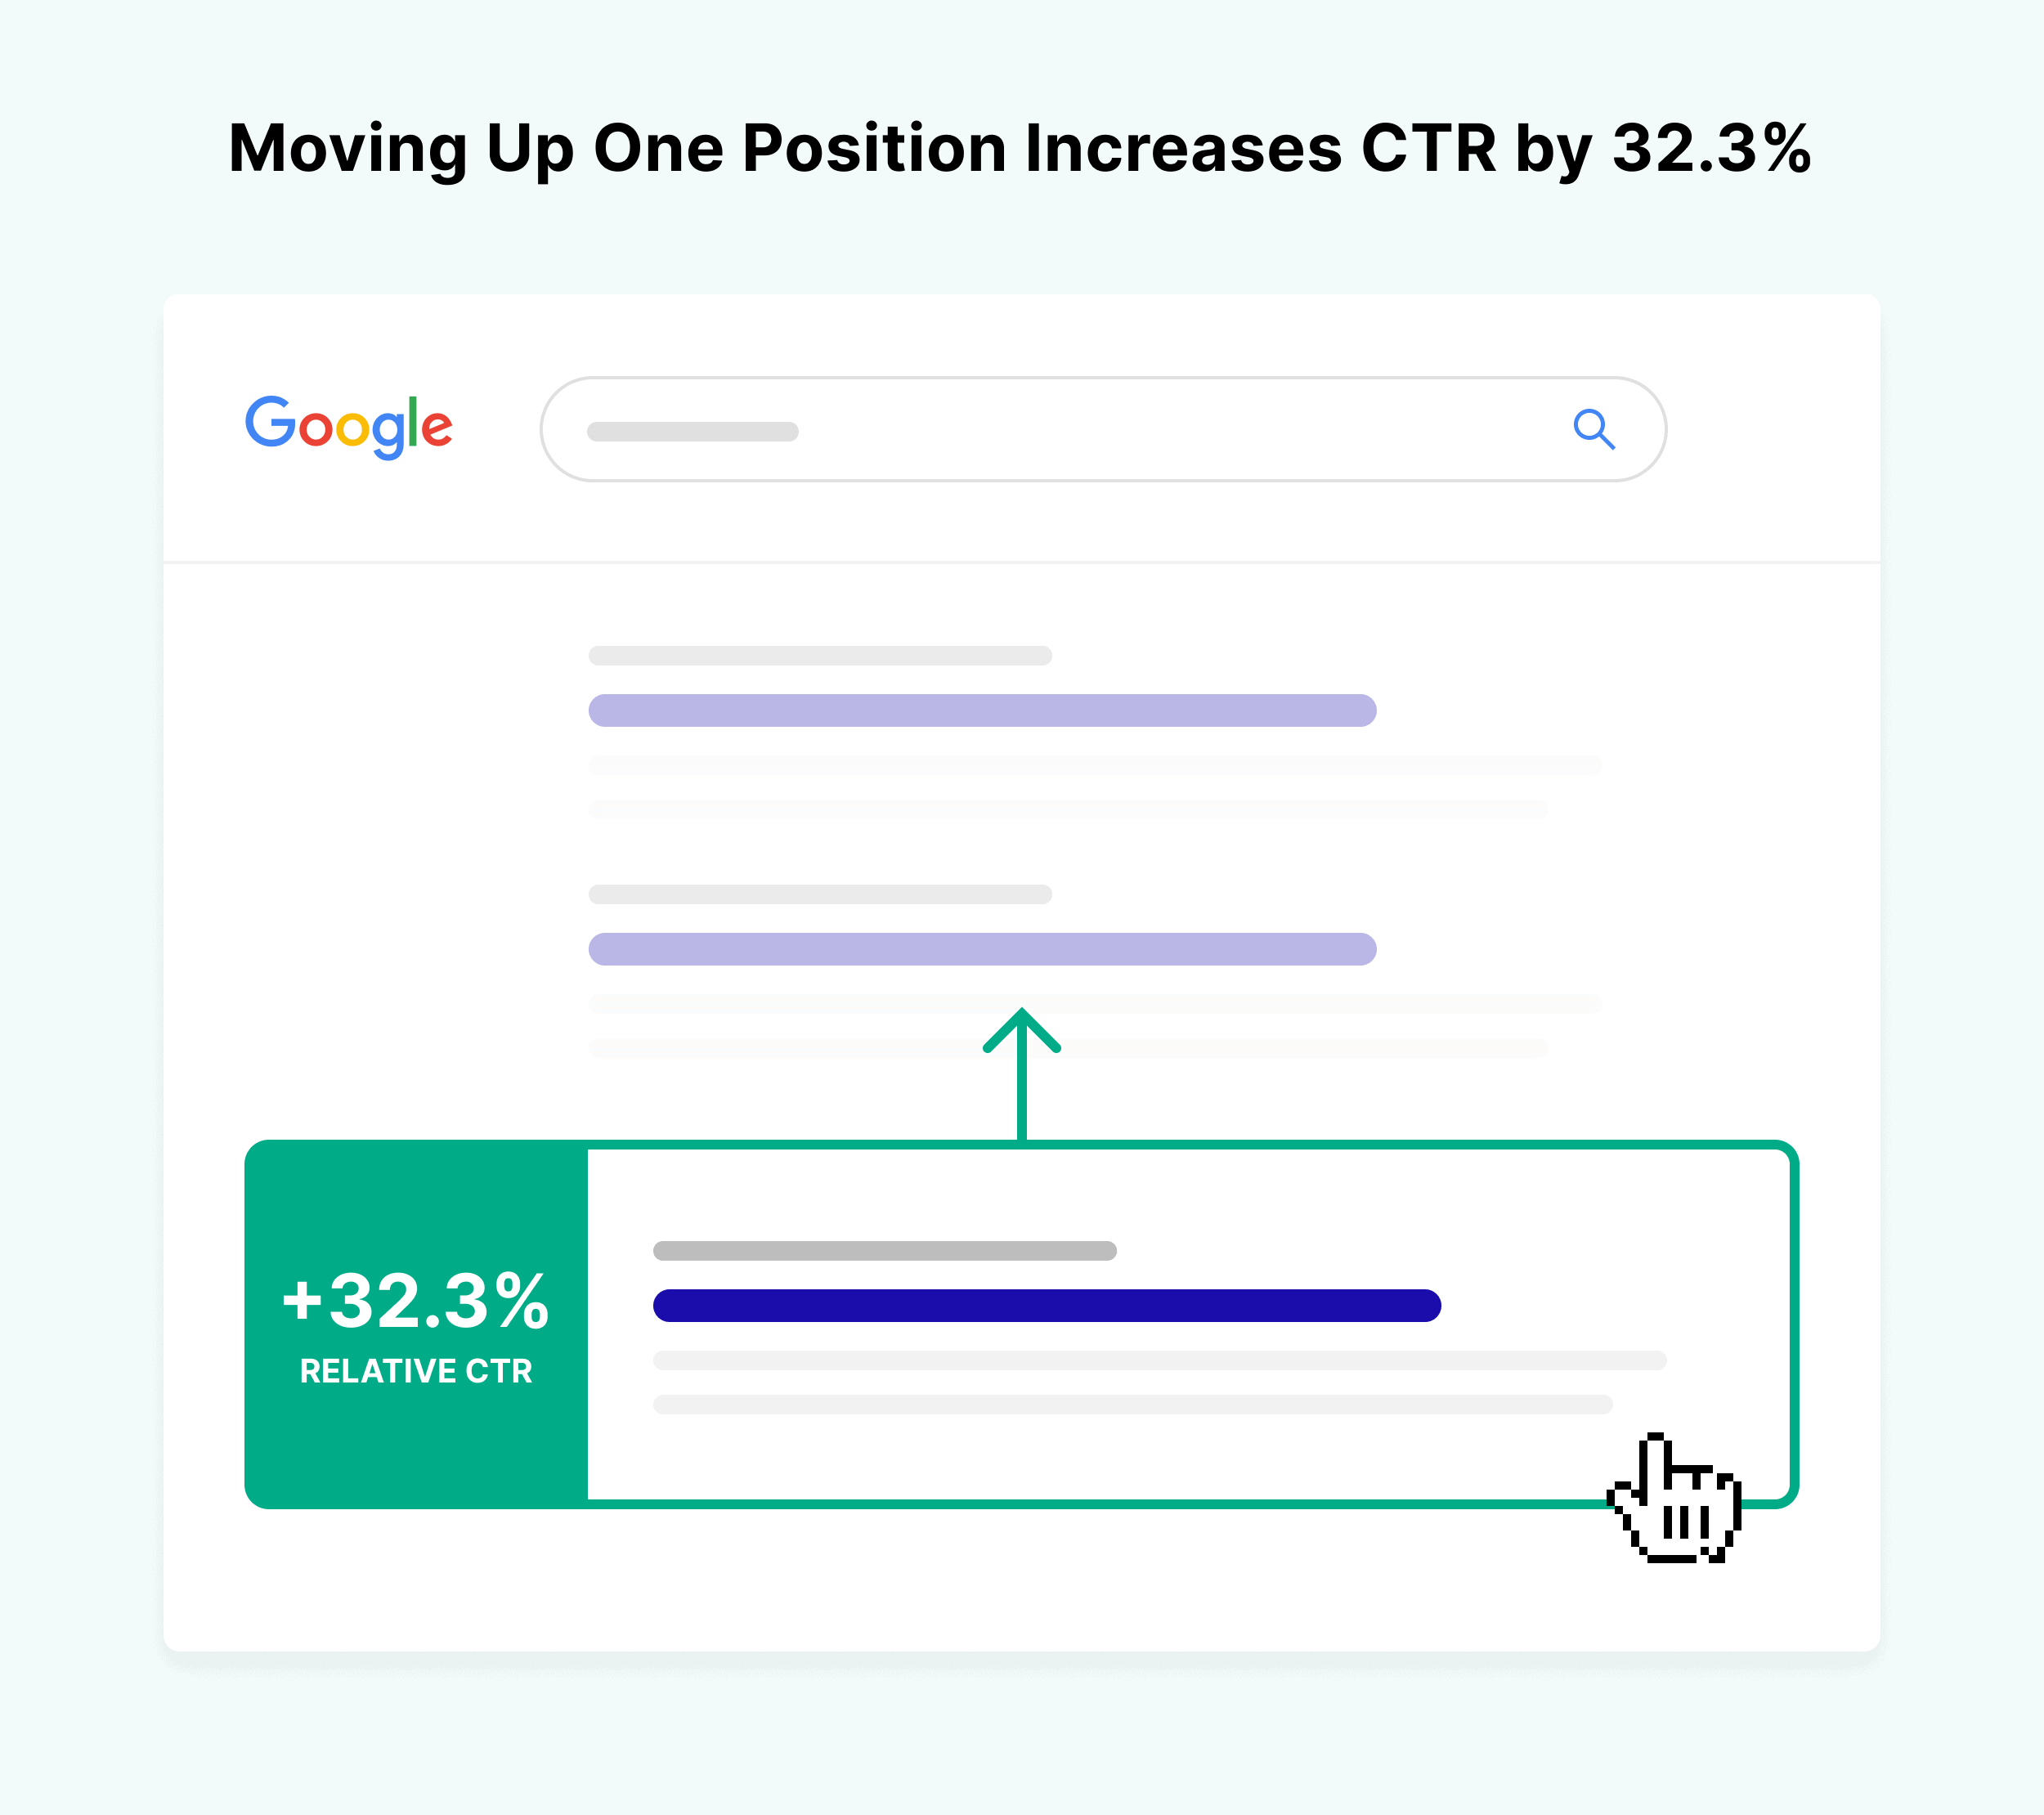 graphic shows that moving up just one spot in search results can increase CTR by 30.8%